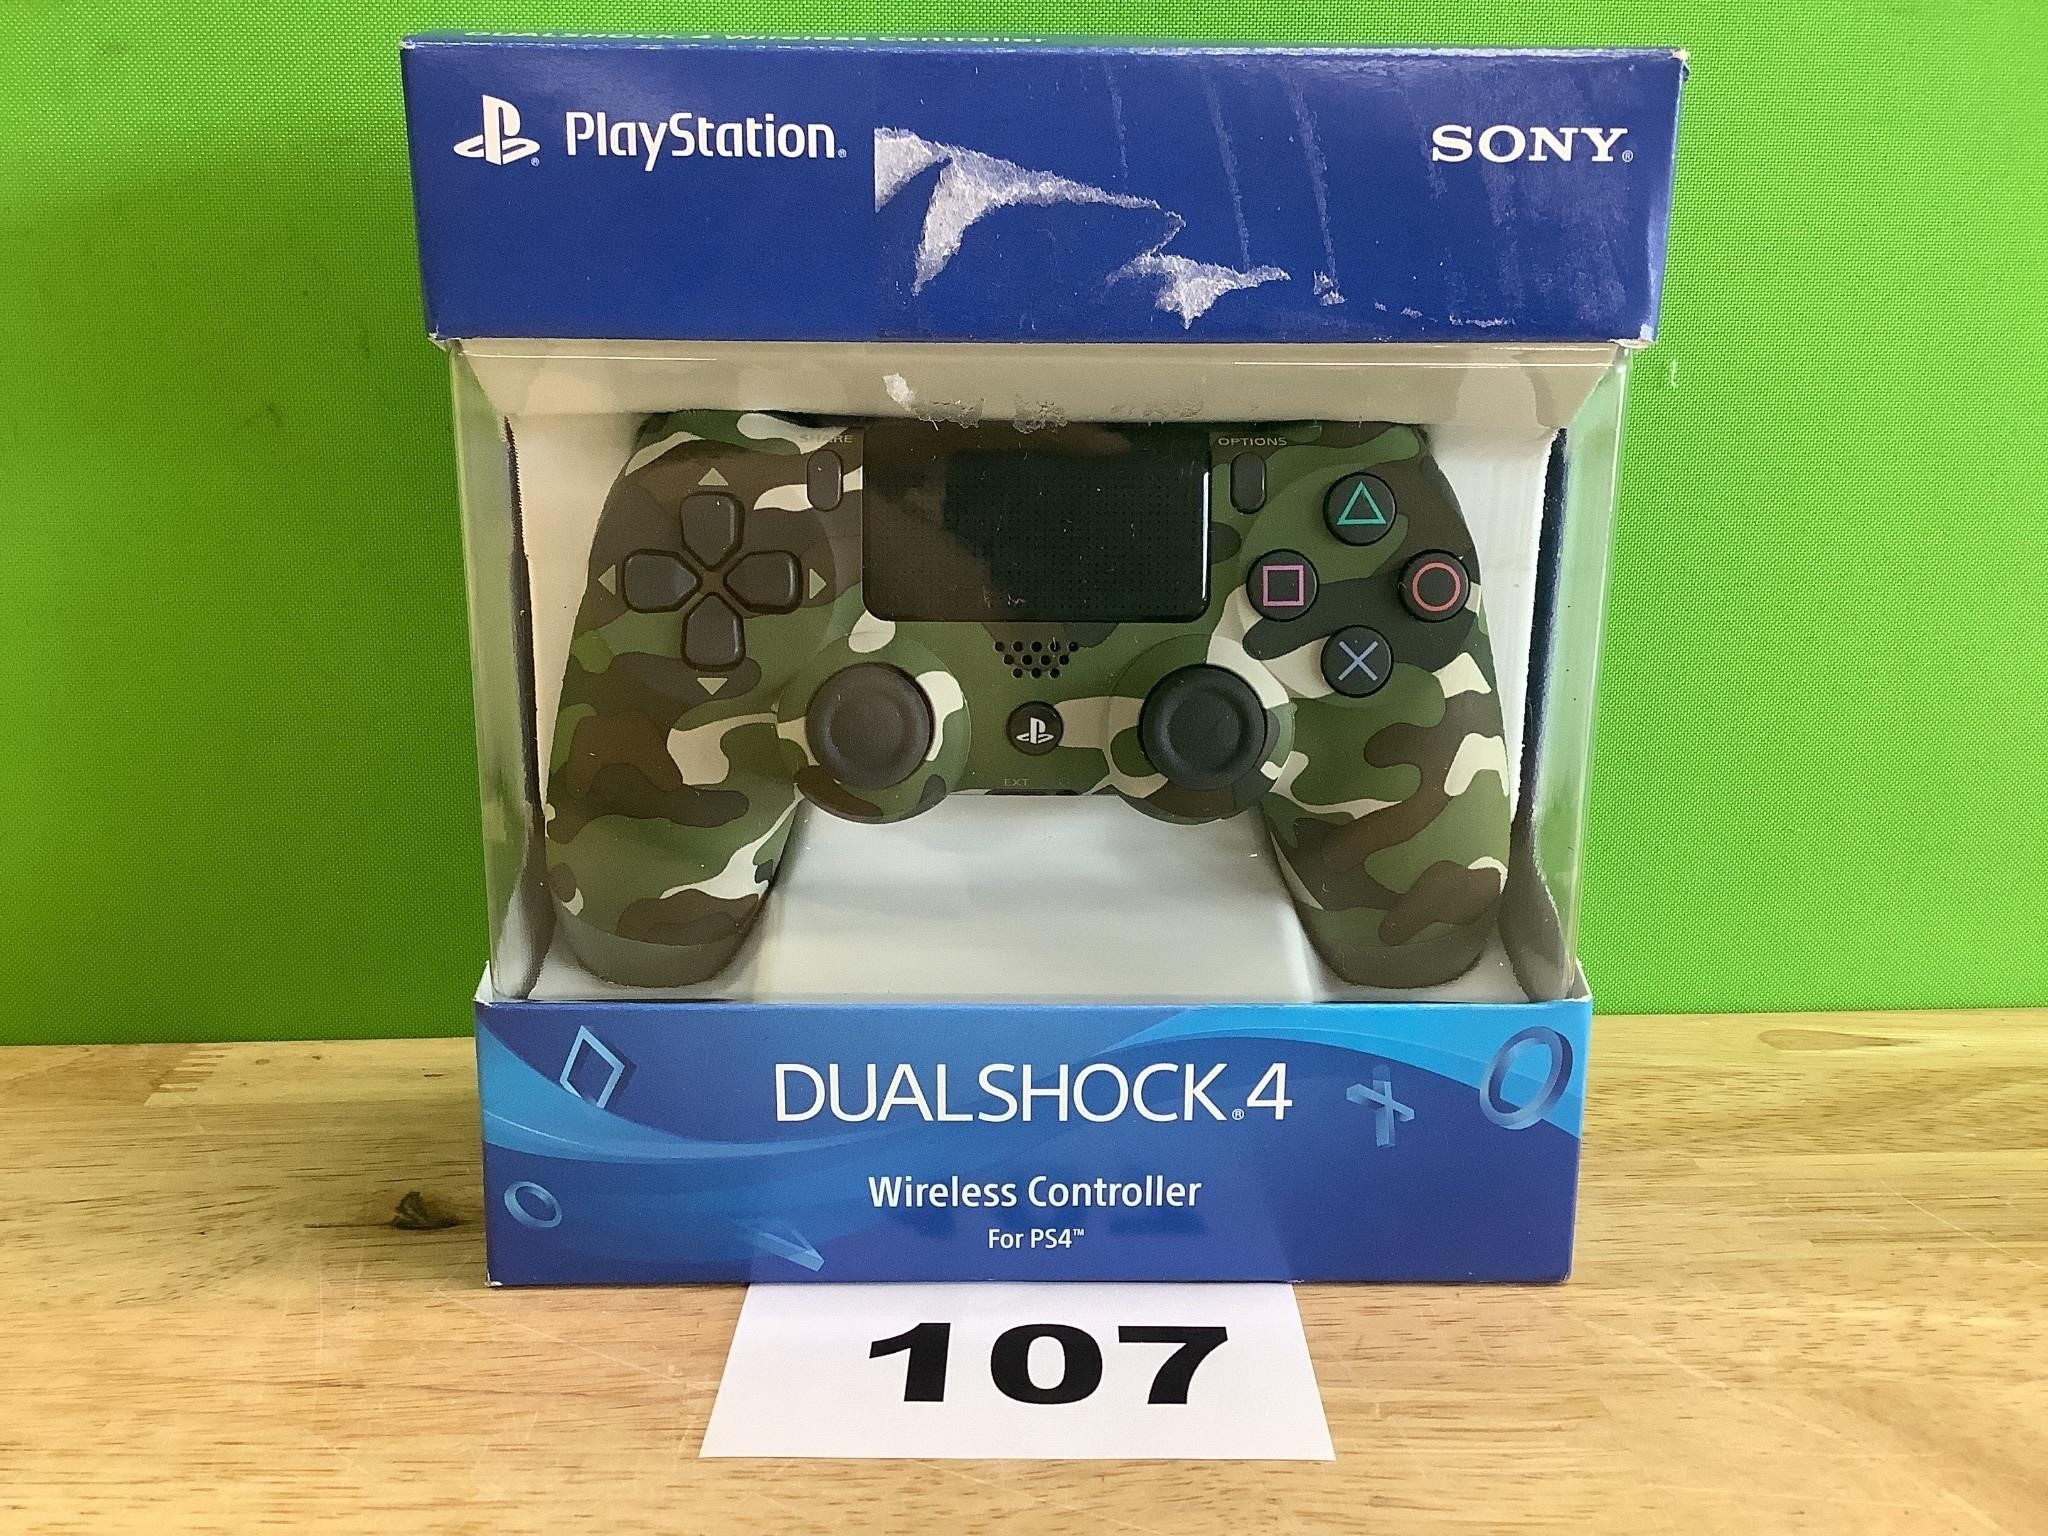 DualShock 4 Wireless Controller for PS4 - Camo